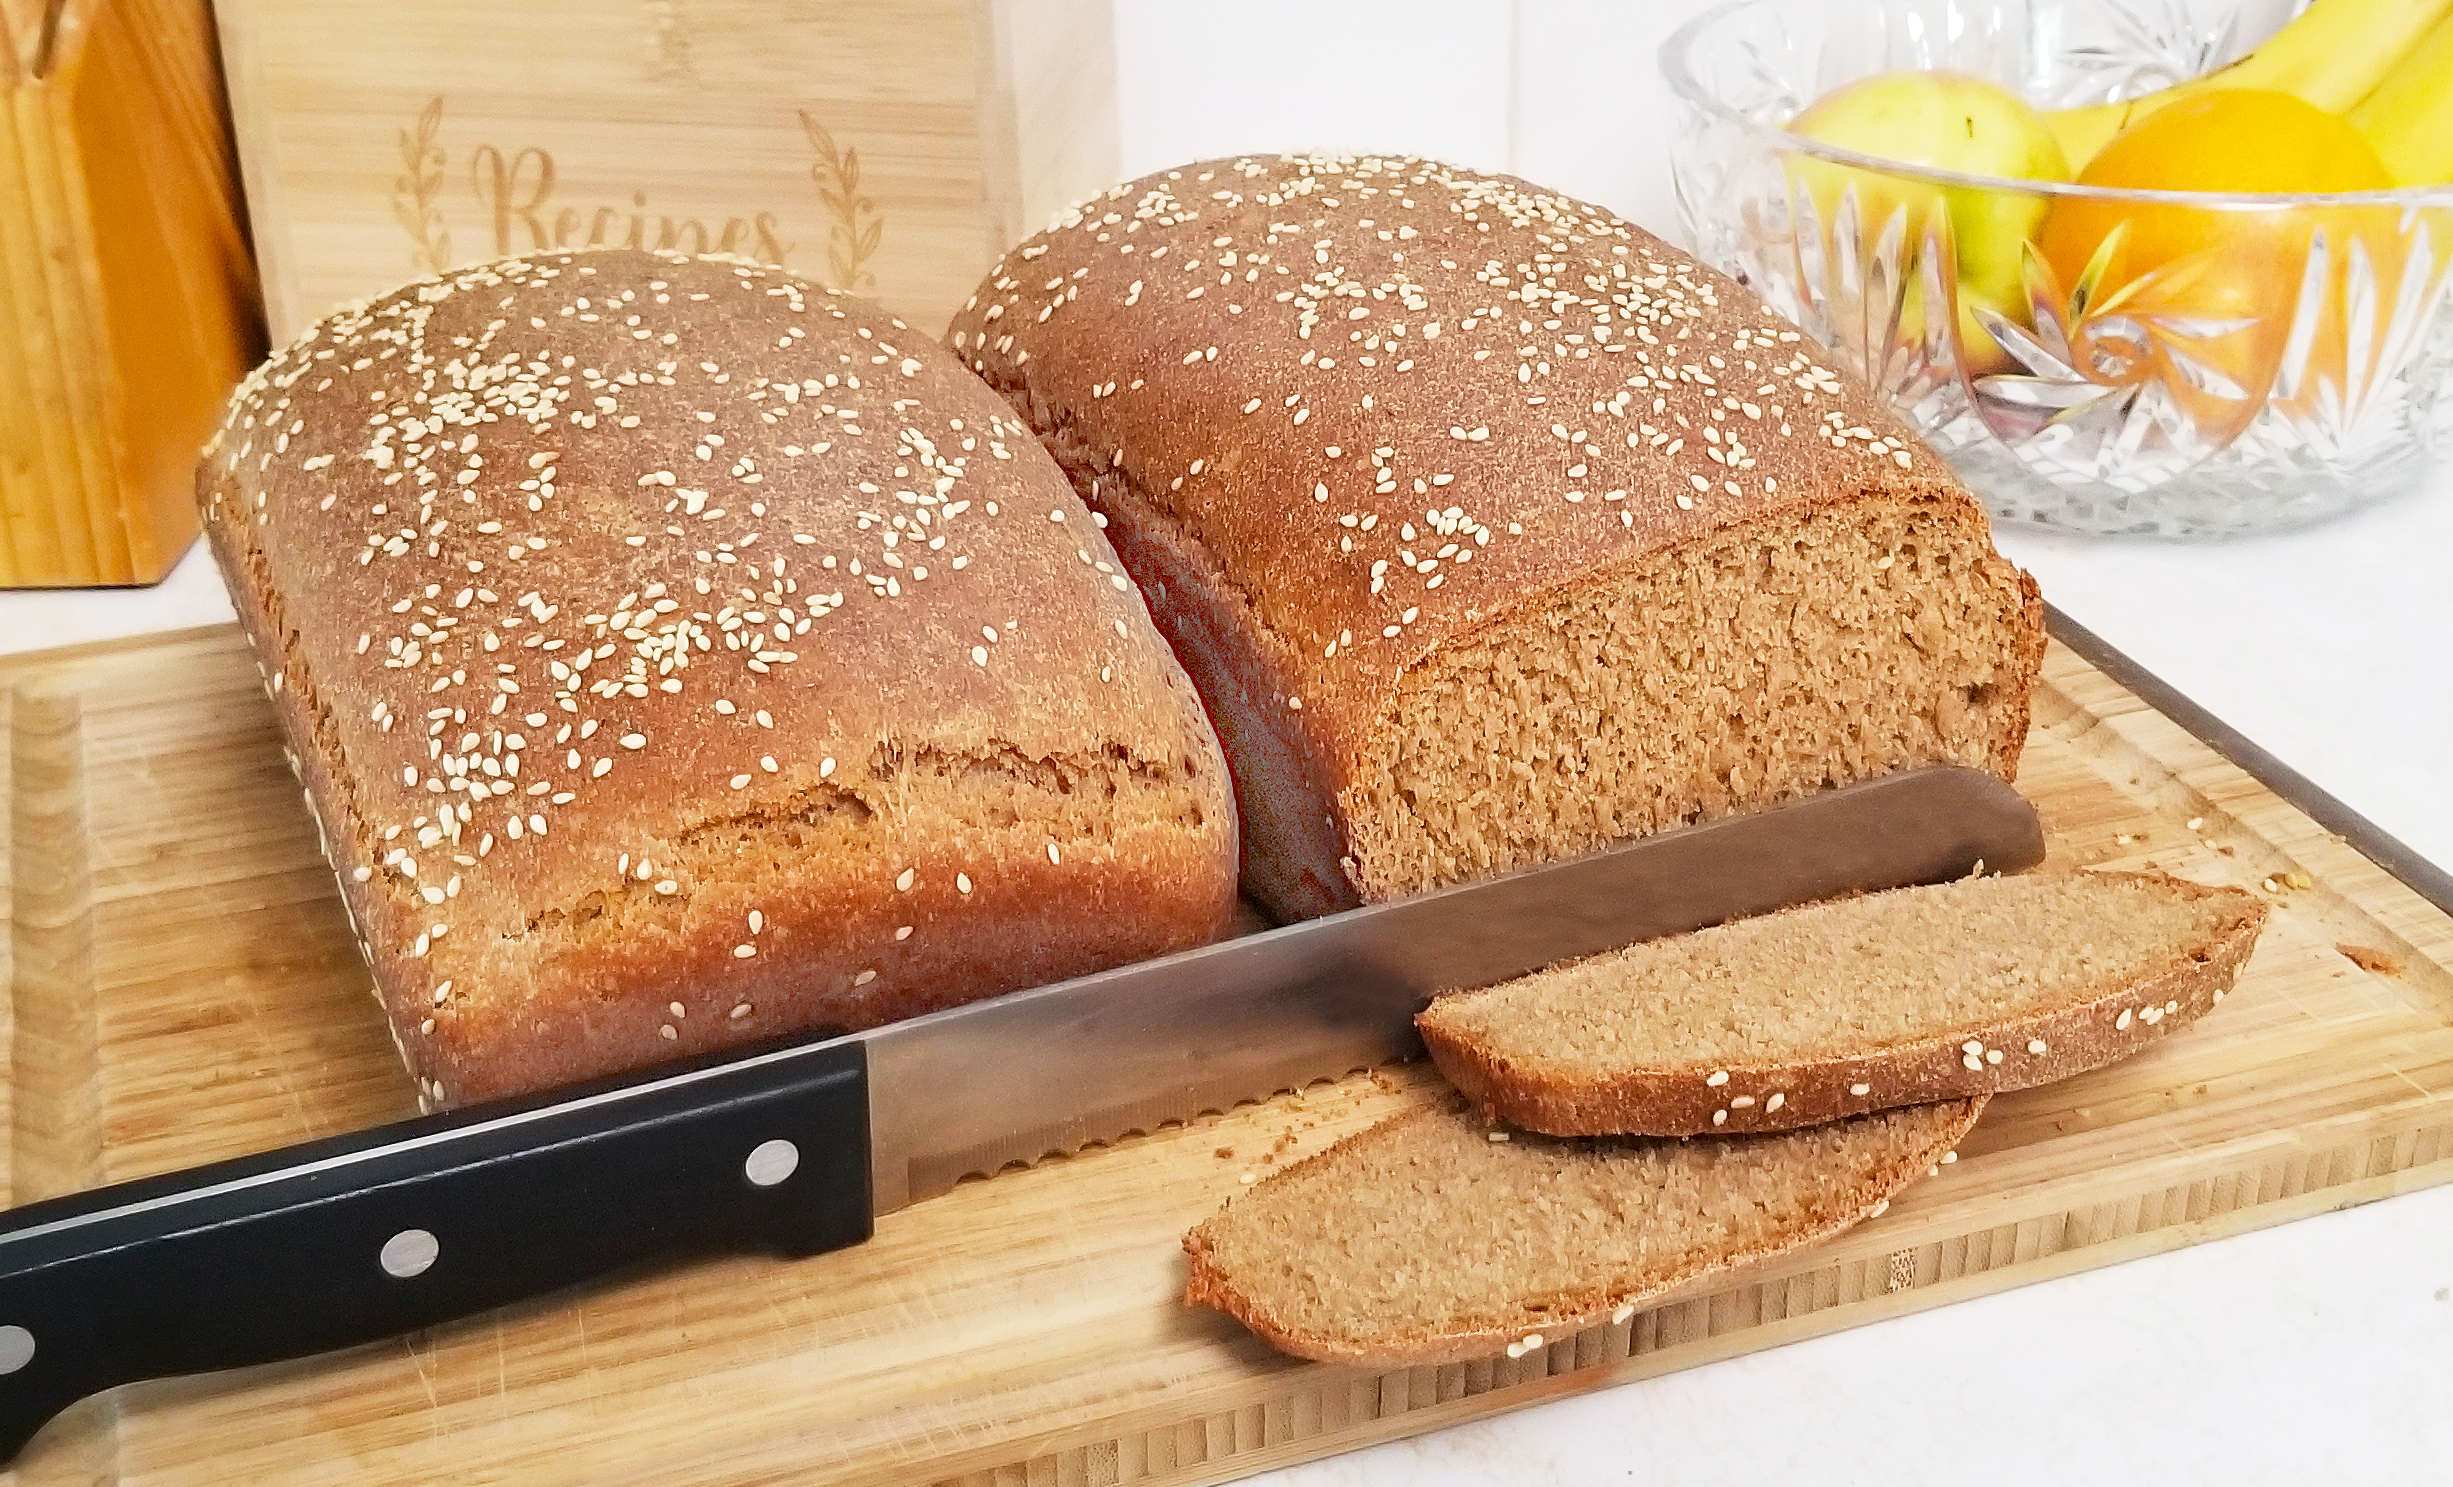 Two loafs of brown bread on a cutting board, with 2 slices cut from 1 loaf.